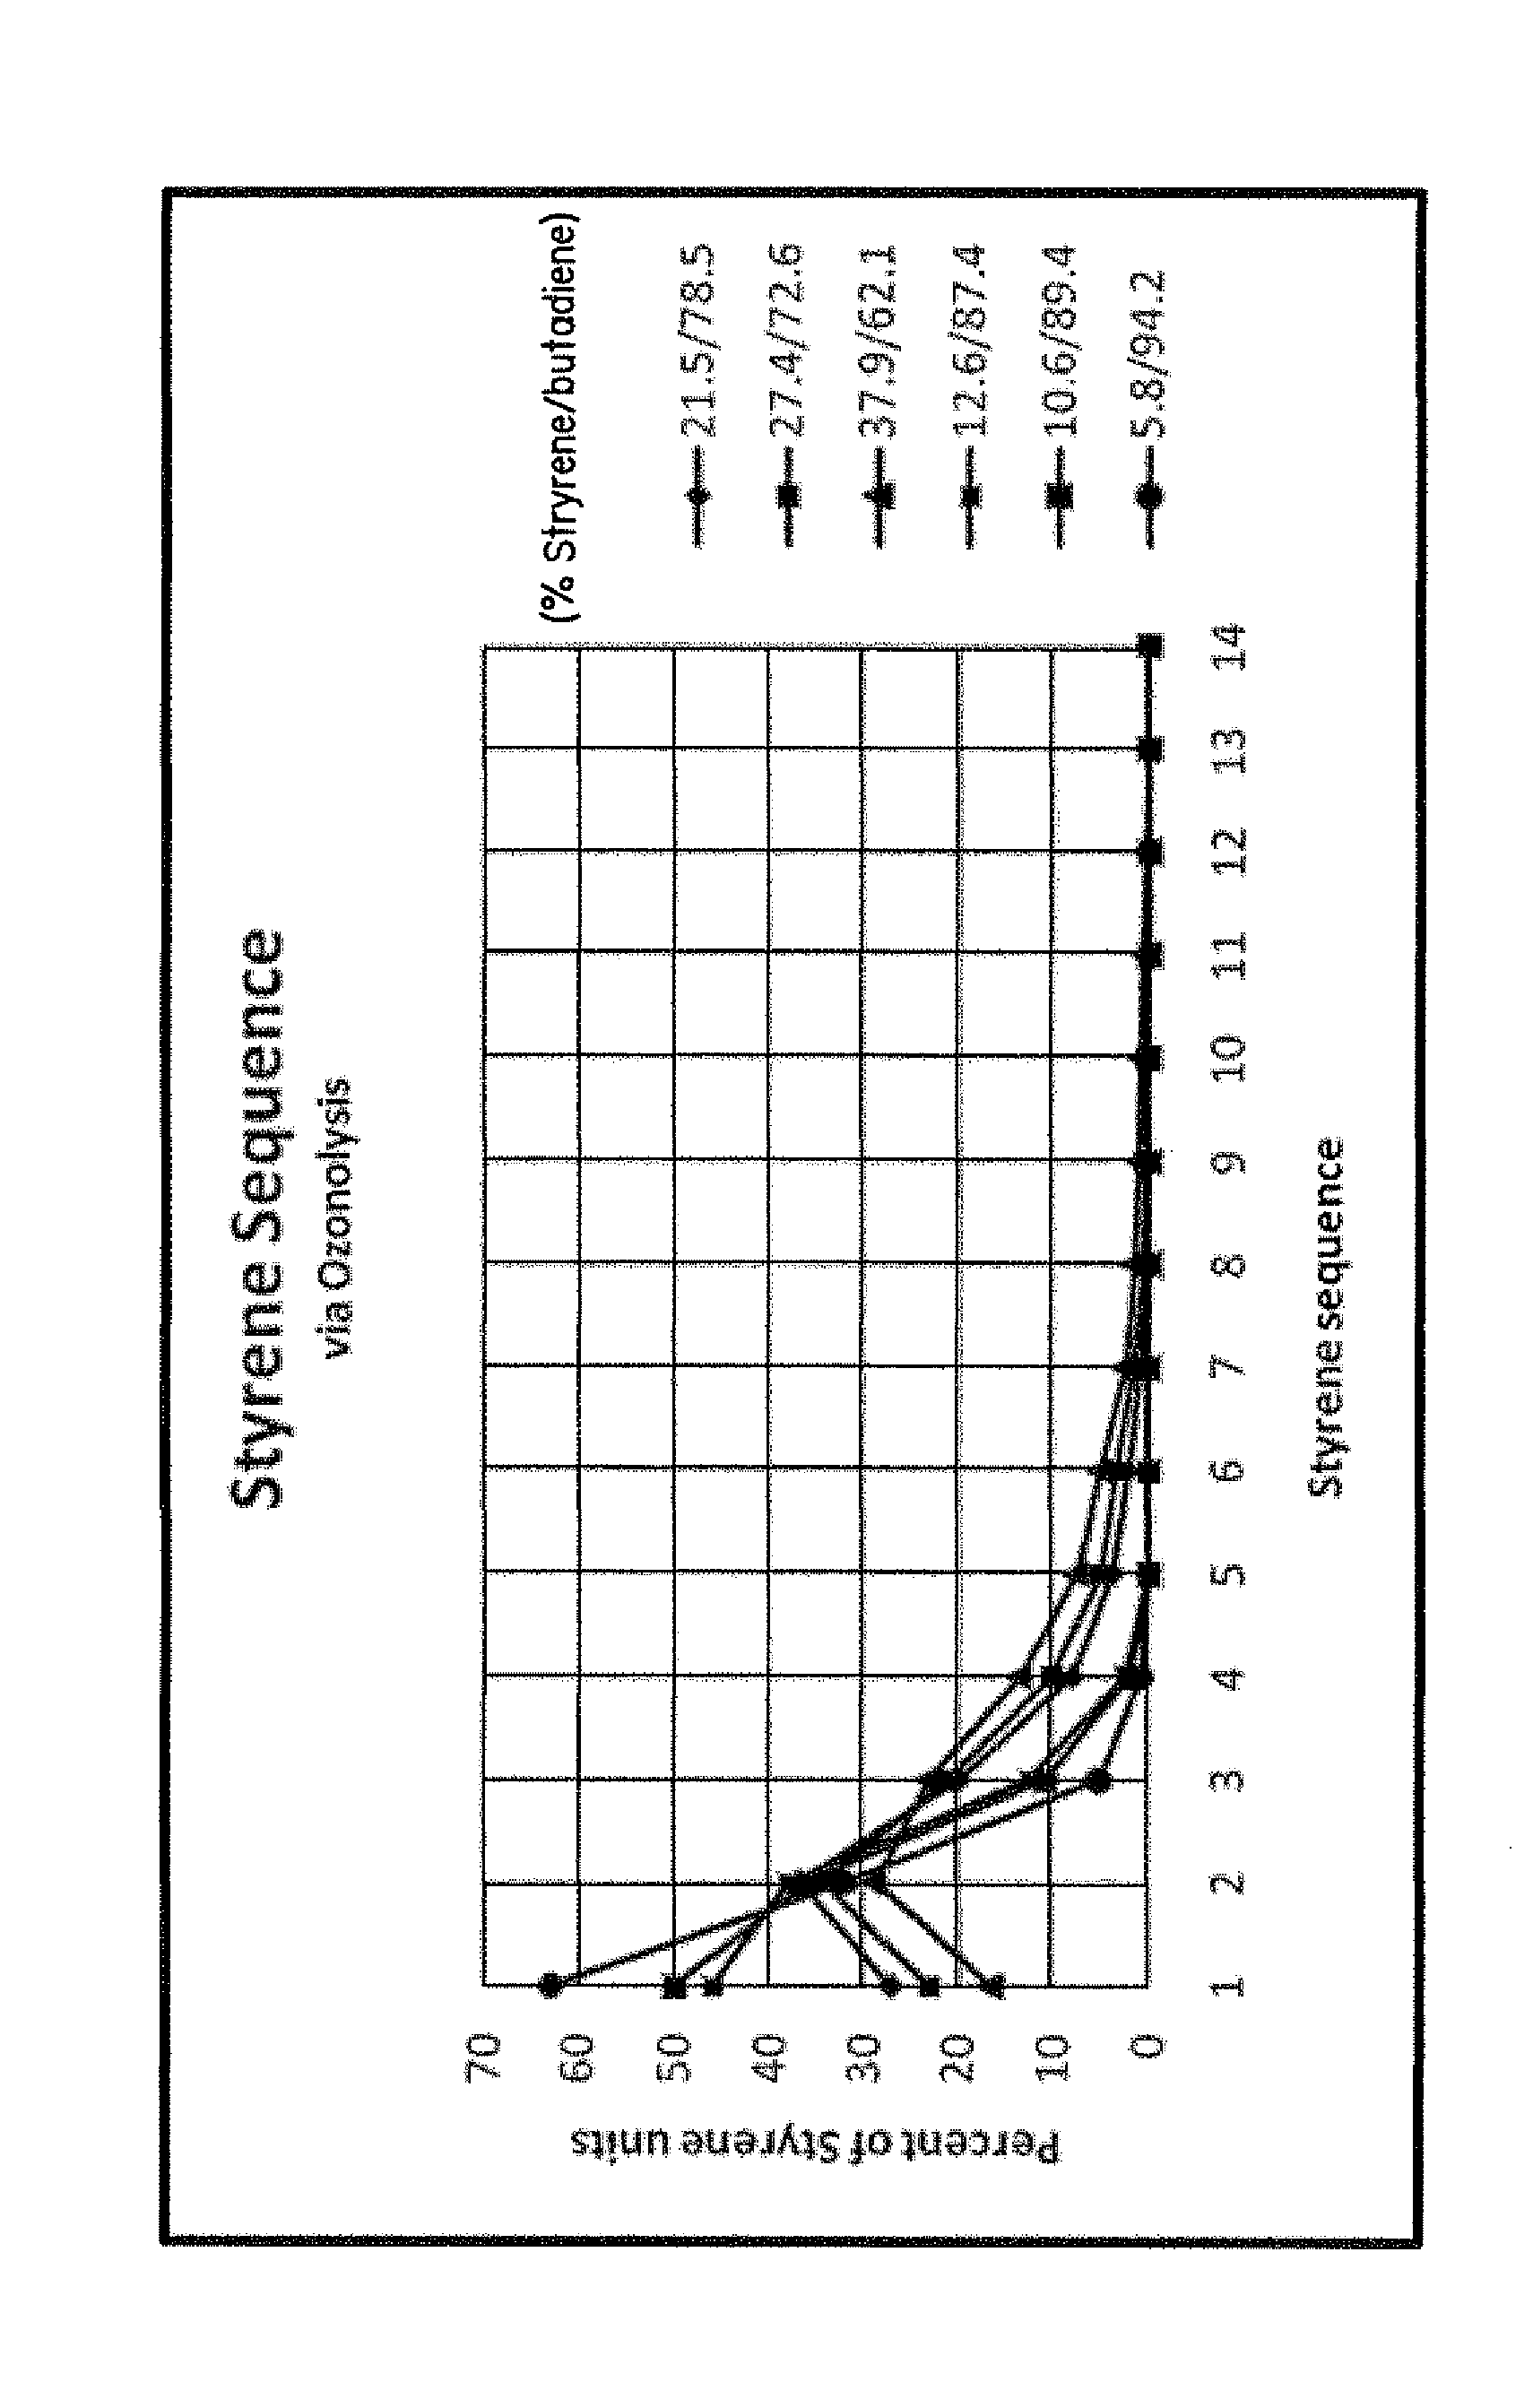 Heterogeneous Rubbery Polymers Having Random, Tapered, and Block Portions Therein and Methods of Making Same